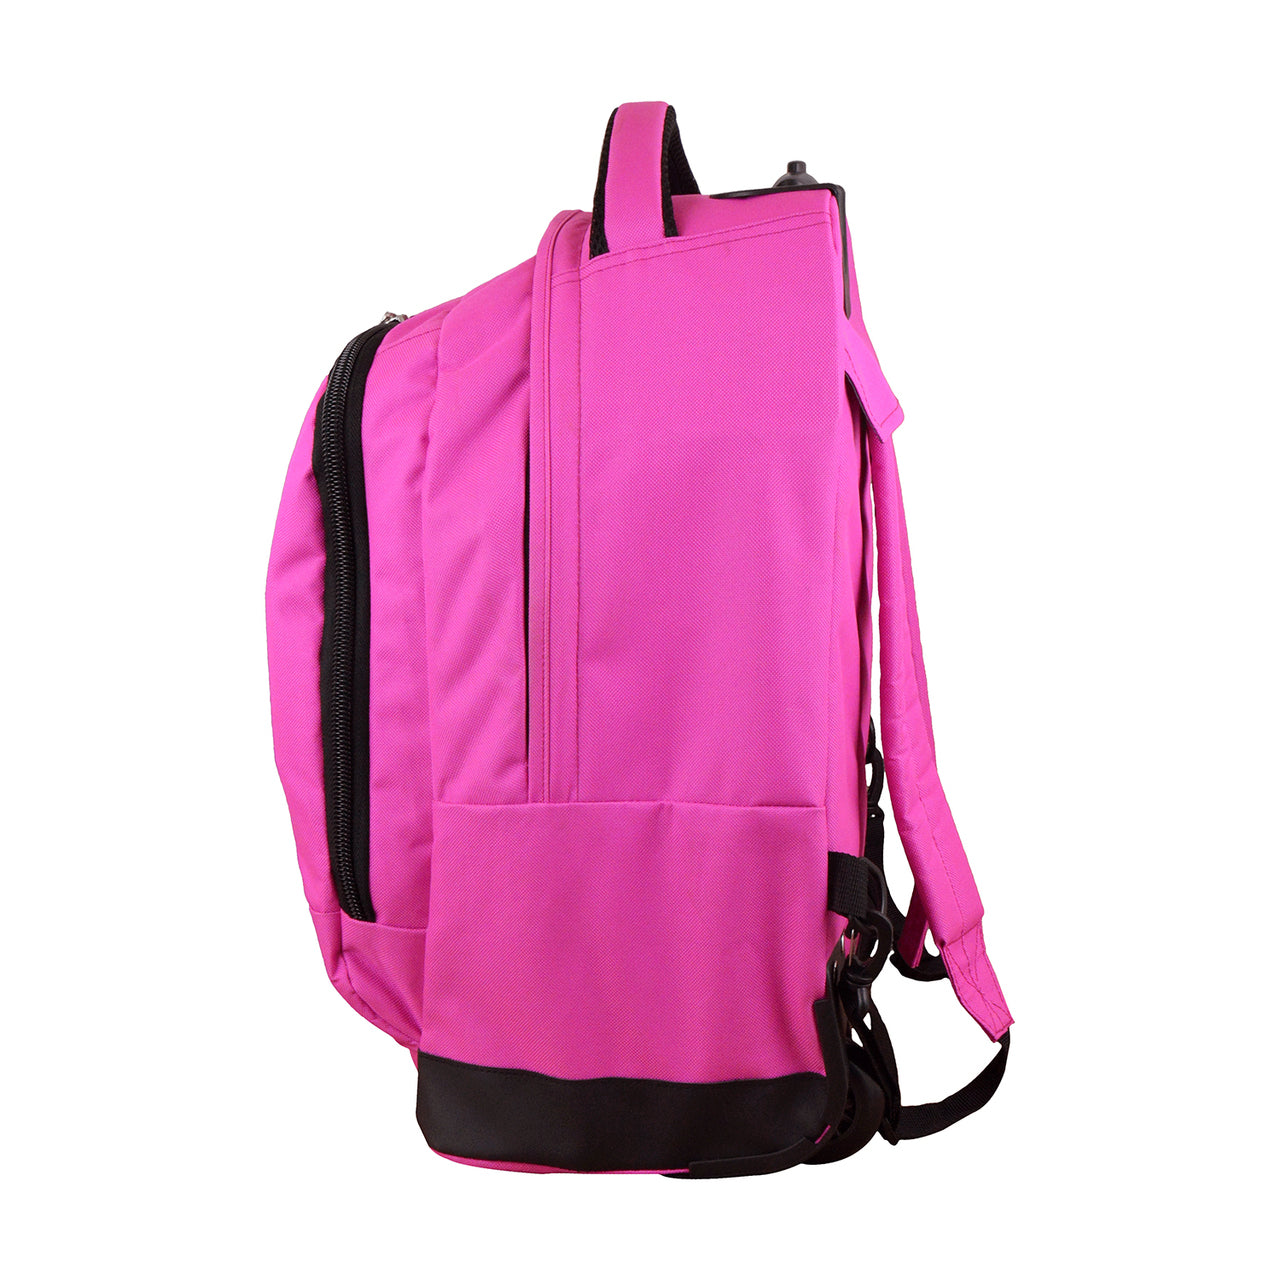 Fresno State Premium Wheeled Backpack in Pink